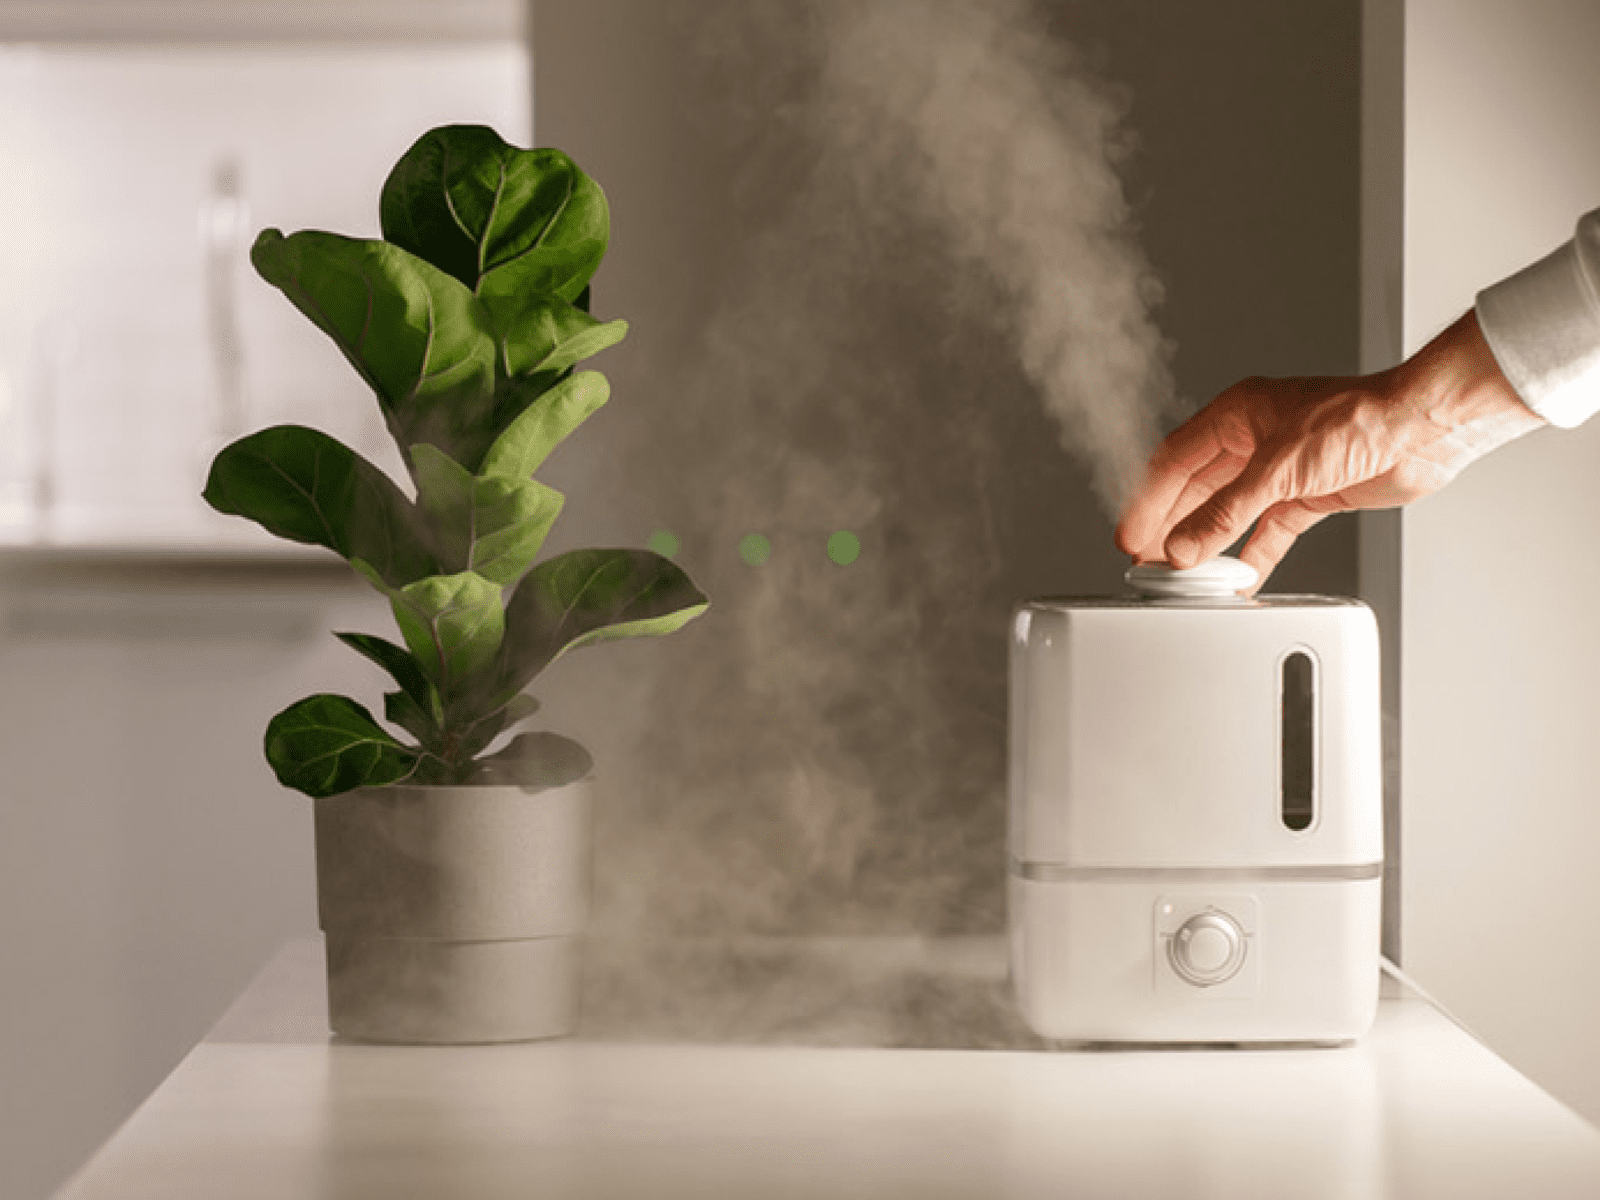 Humidifier and plants